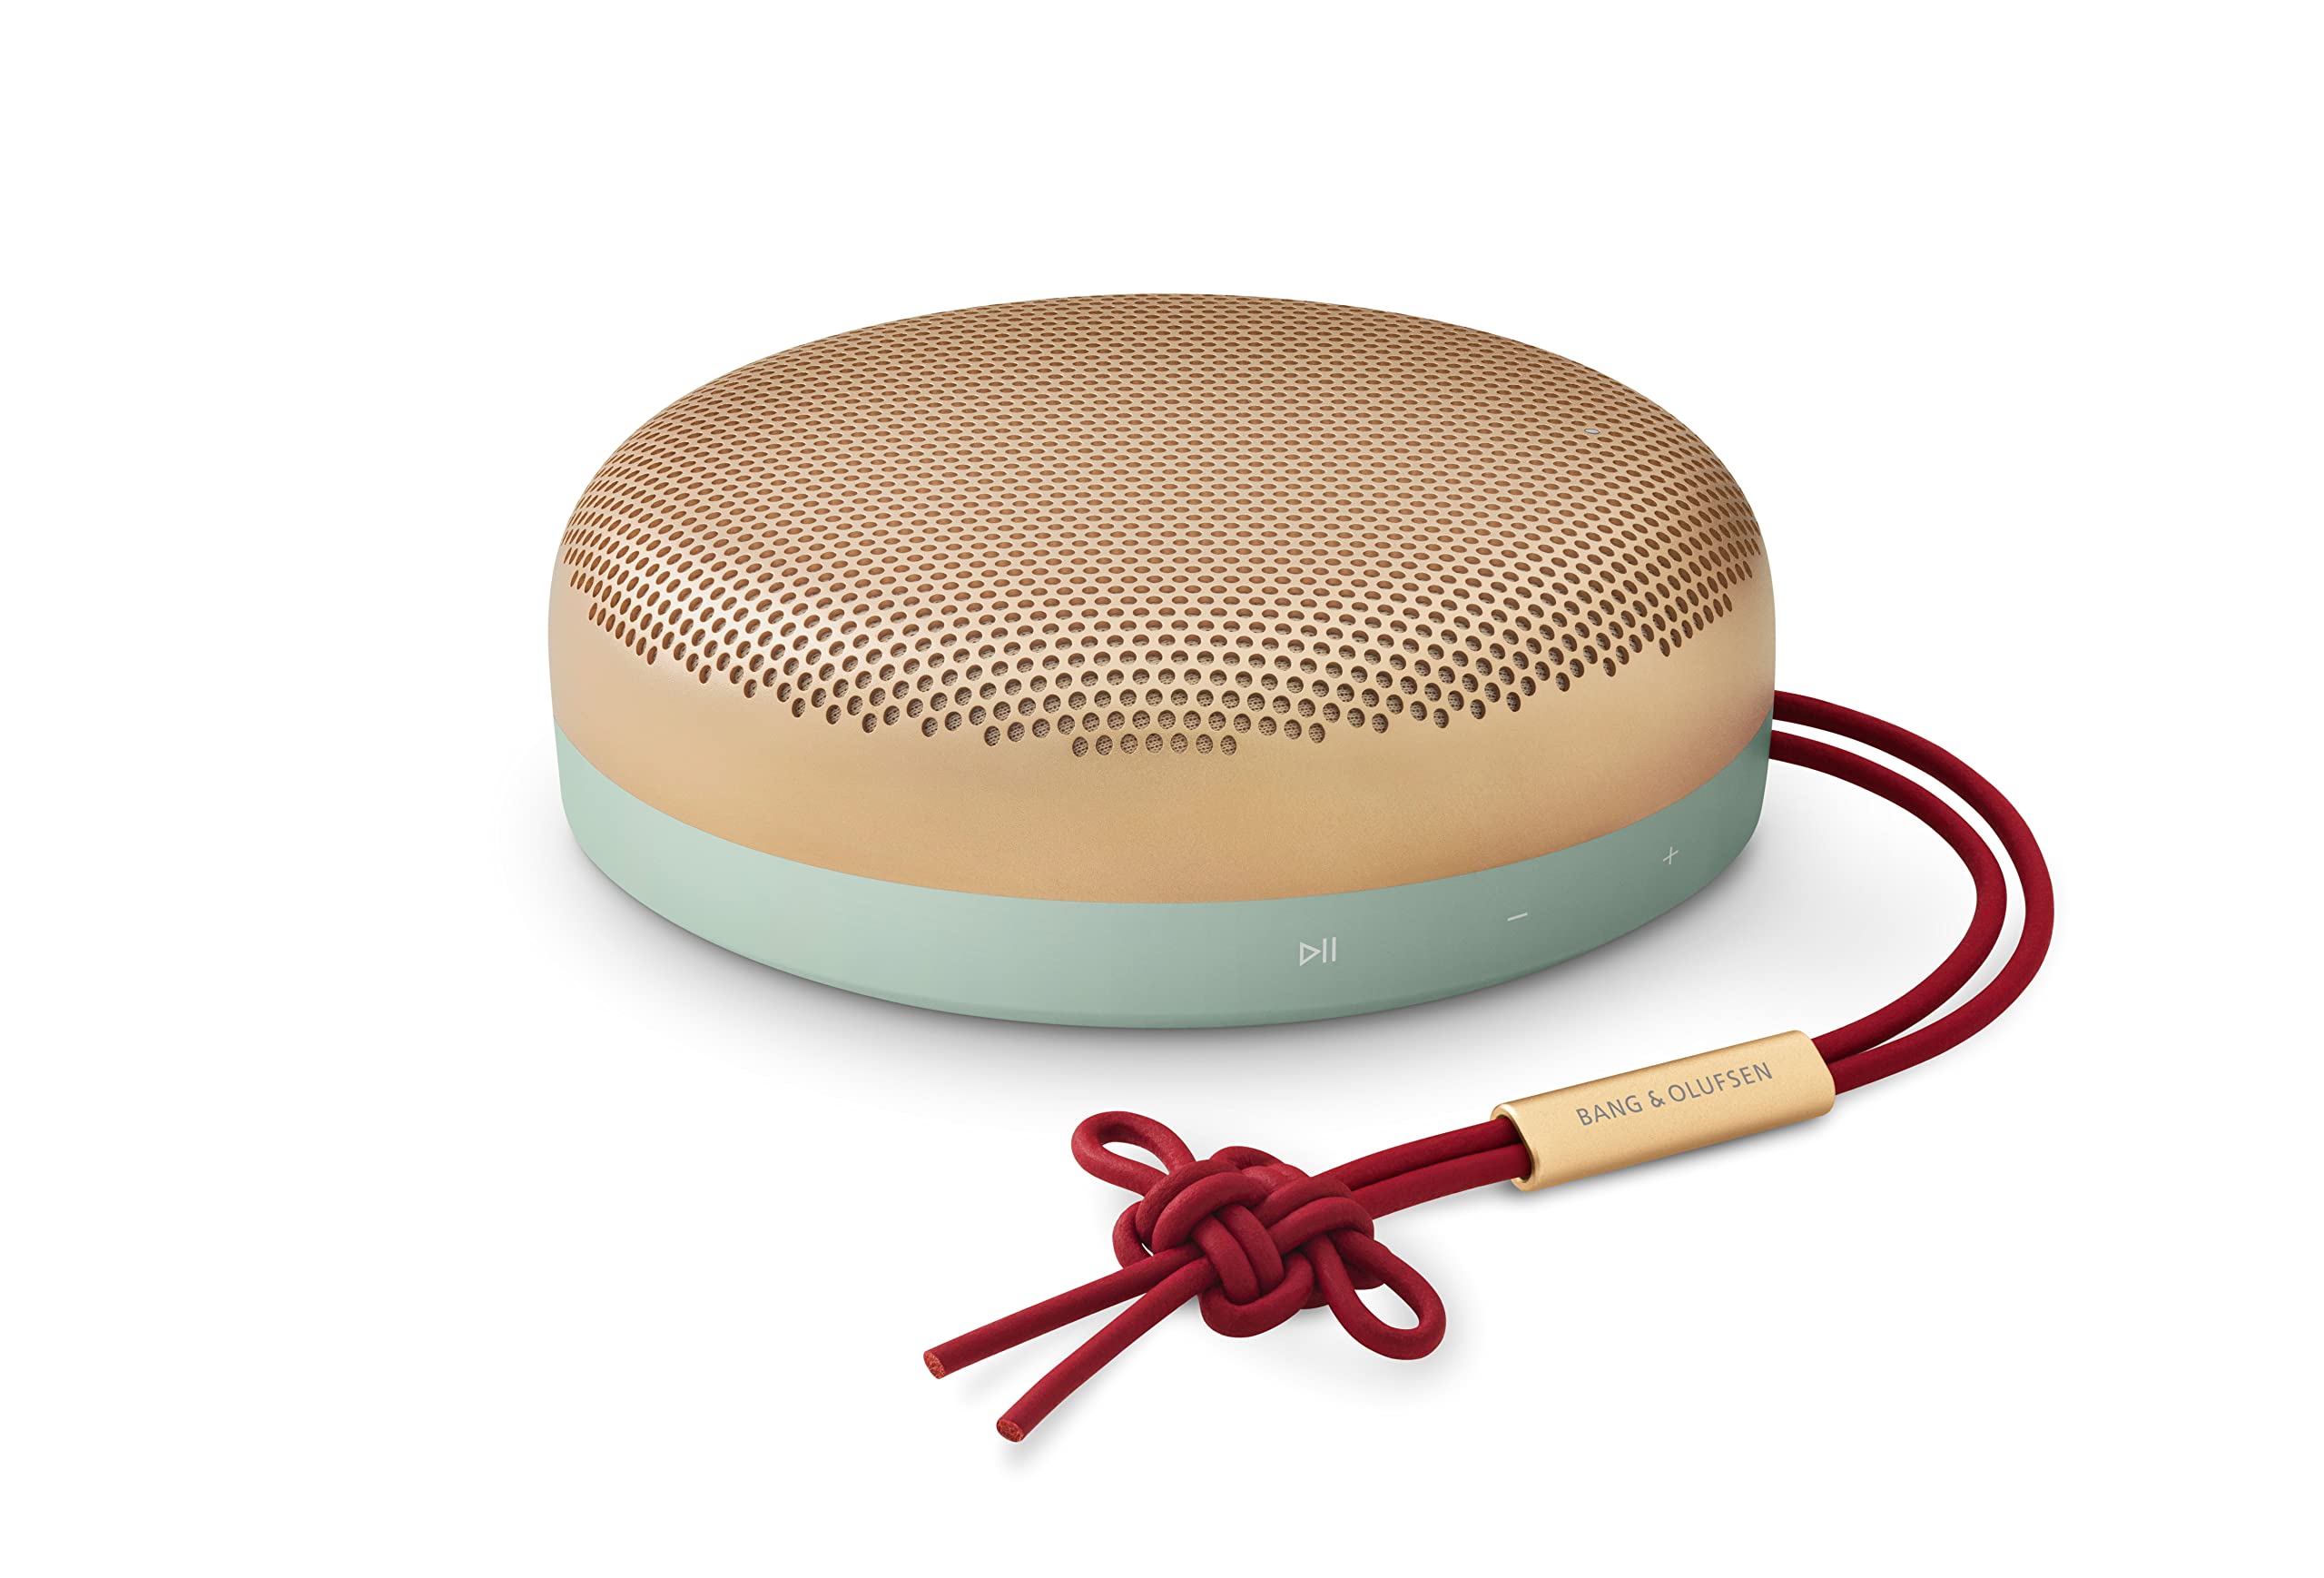 Bang & Olufsen Beosound A1 (2nd Generation) Wireless Portable Waterproof Bluetooth Speaker with Microphone, Jade Green - LIMITED EDITION